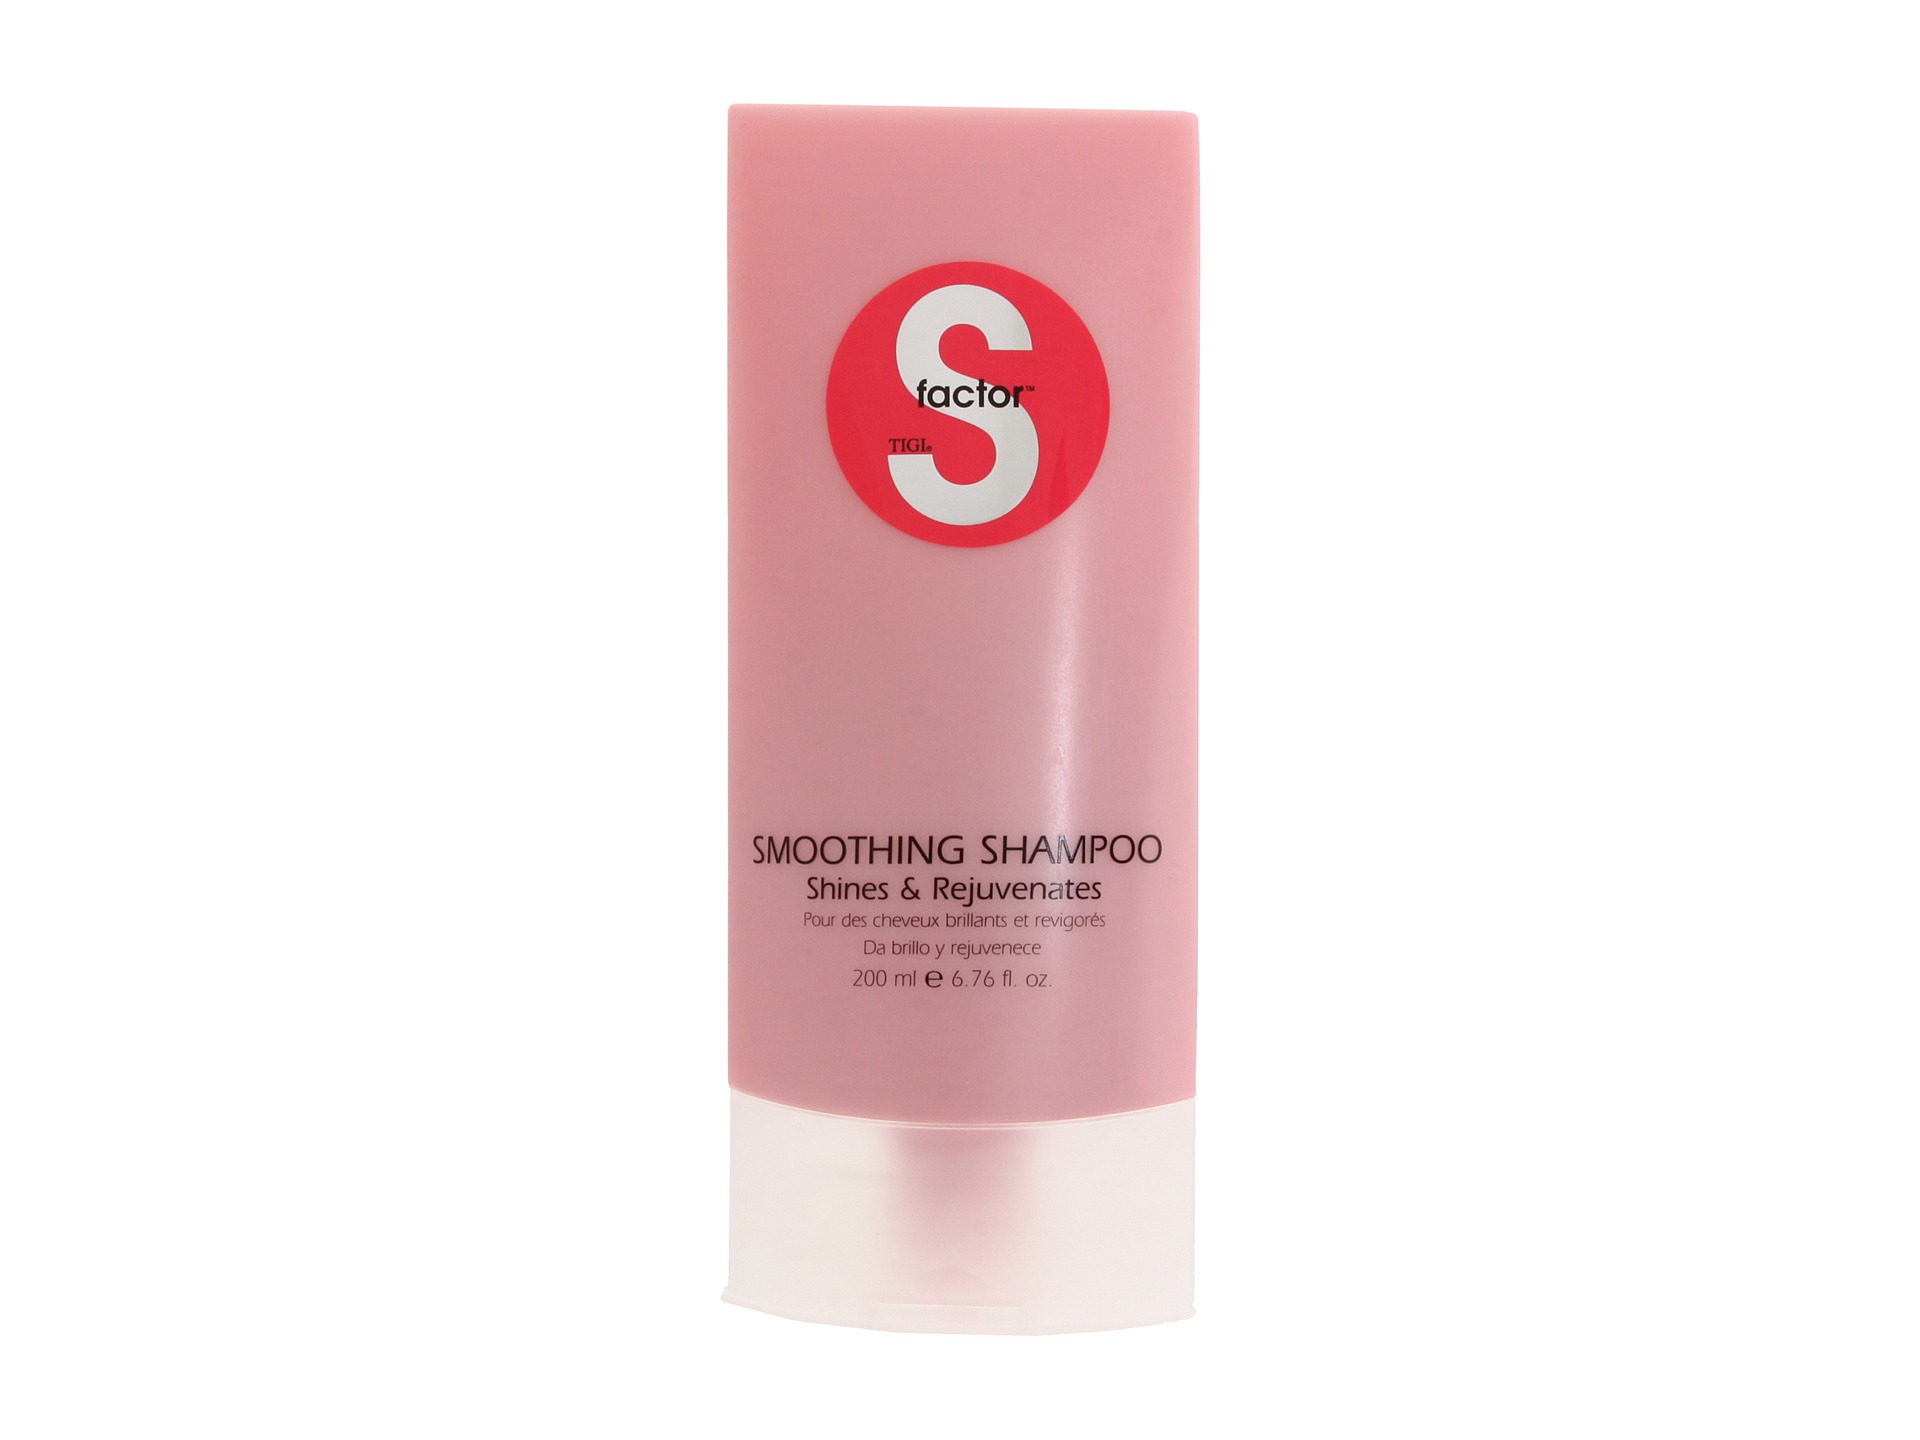 S Factor Smoothing Shampoo 6.76 oz. N/A